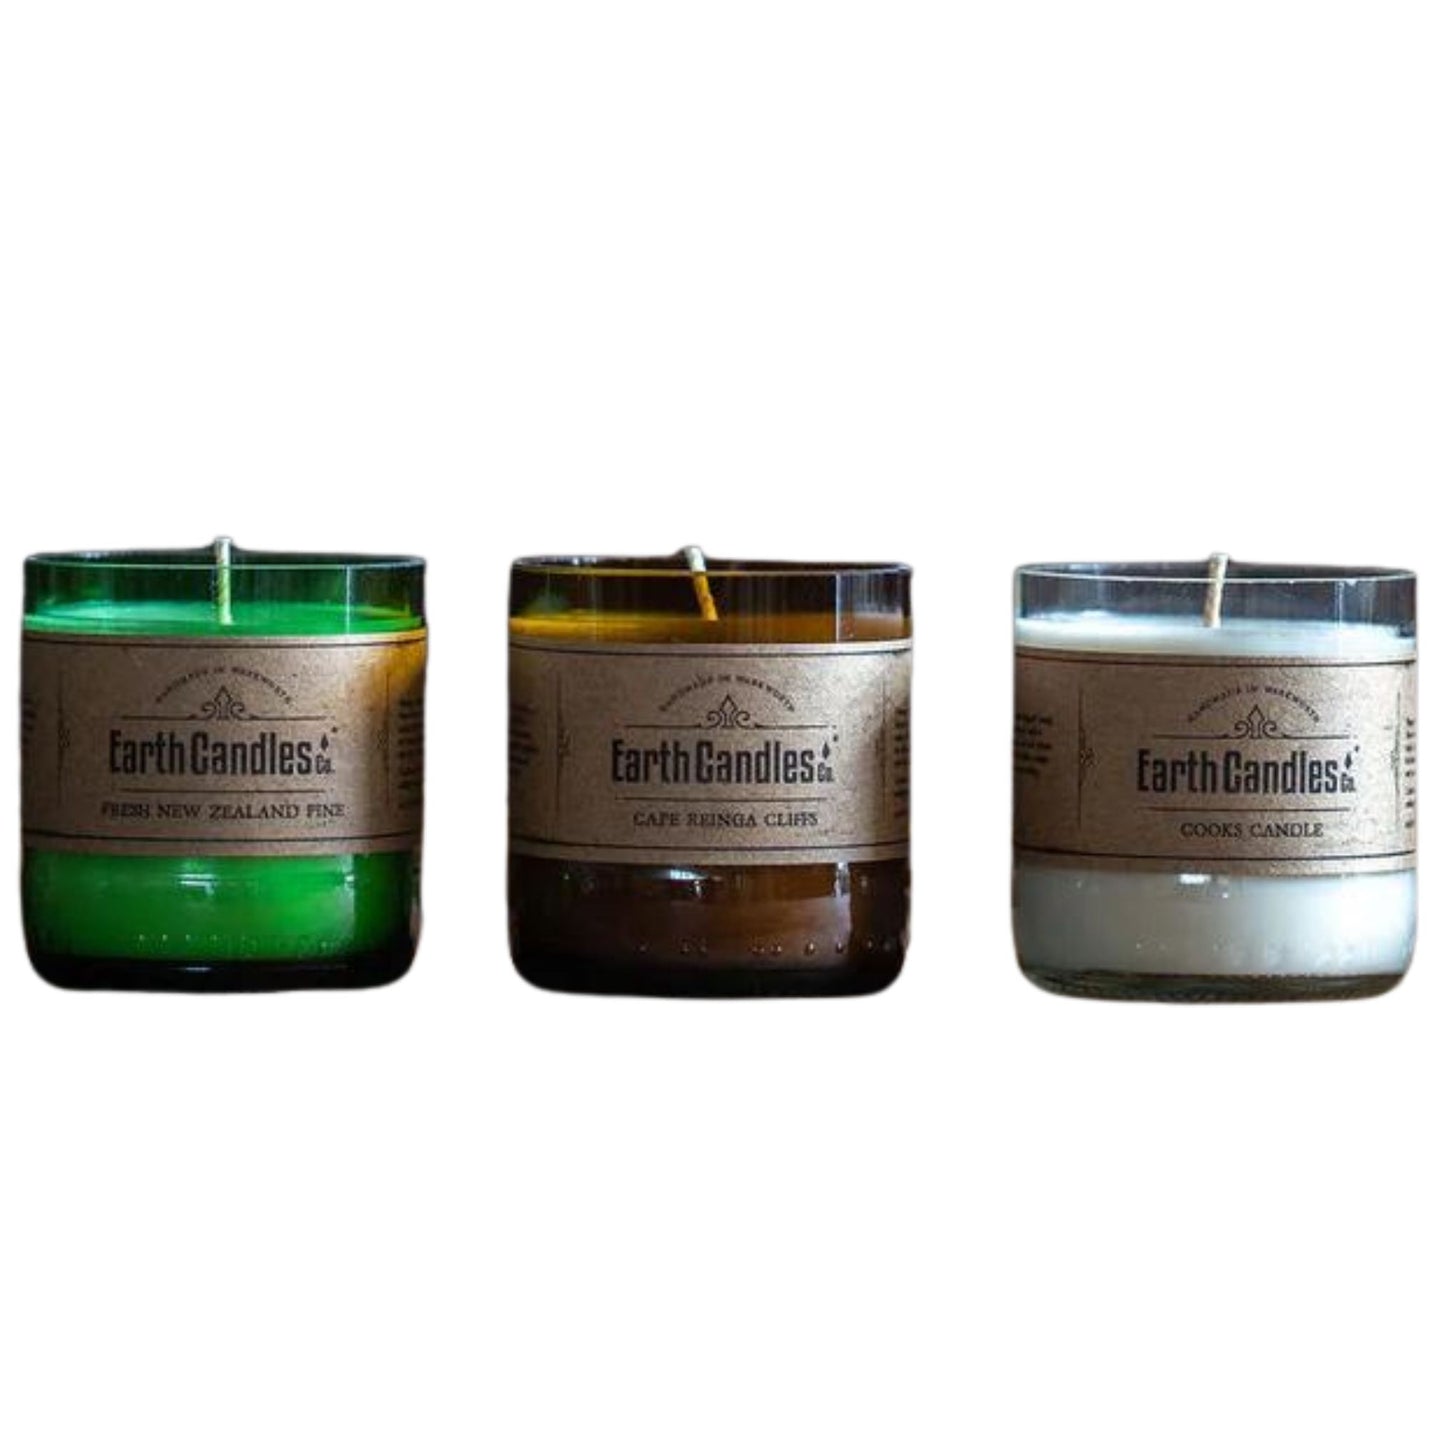 Fresh New Zealand Pine 100g tealight Earth Candles. Made in re purposed bottles. This is a pack of 3 